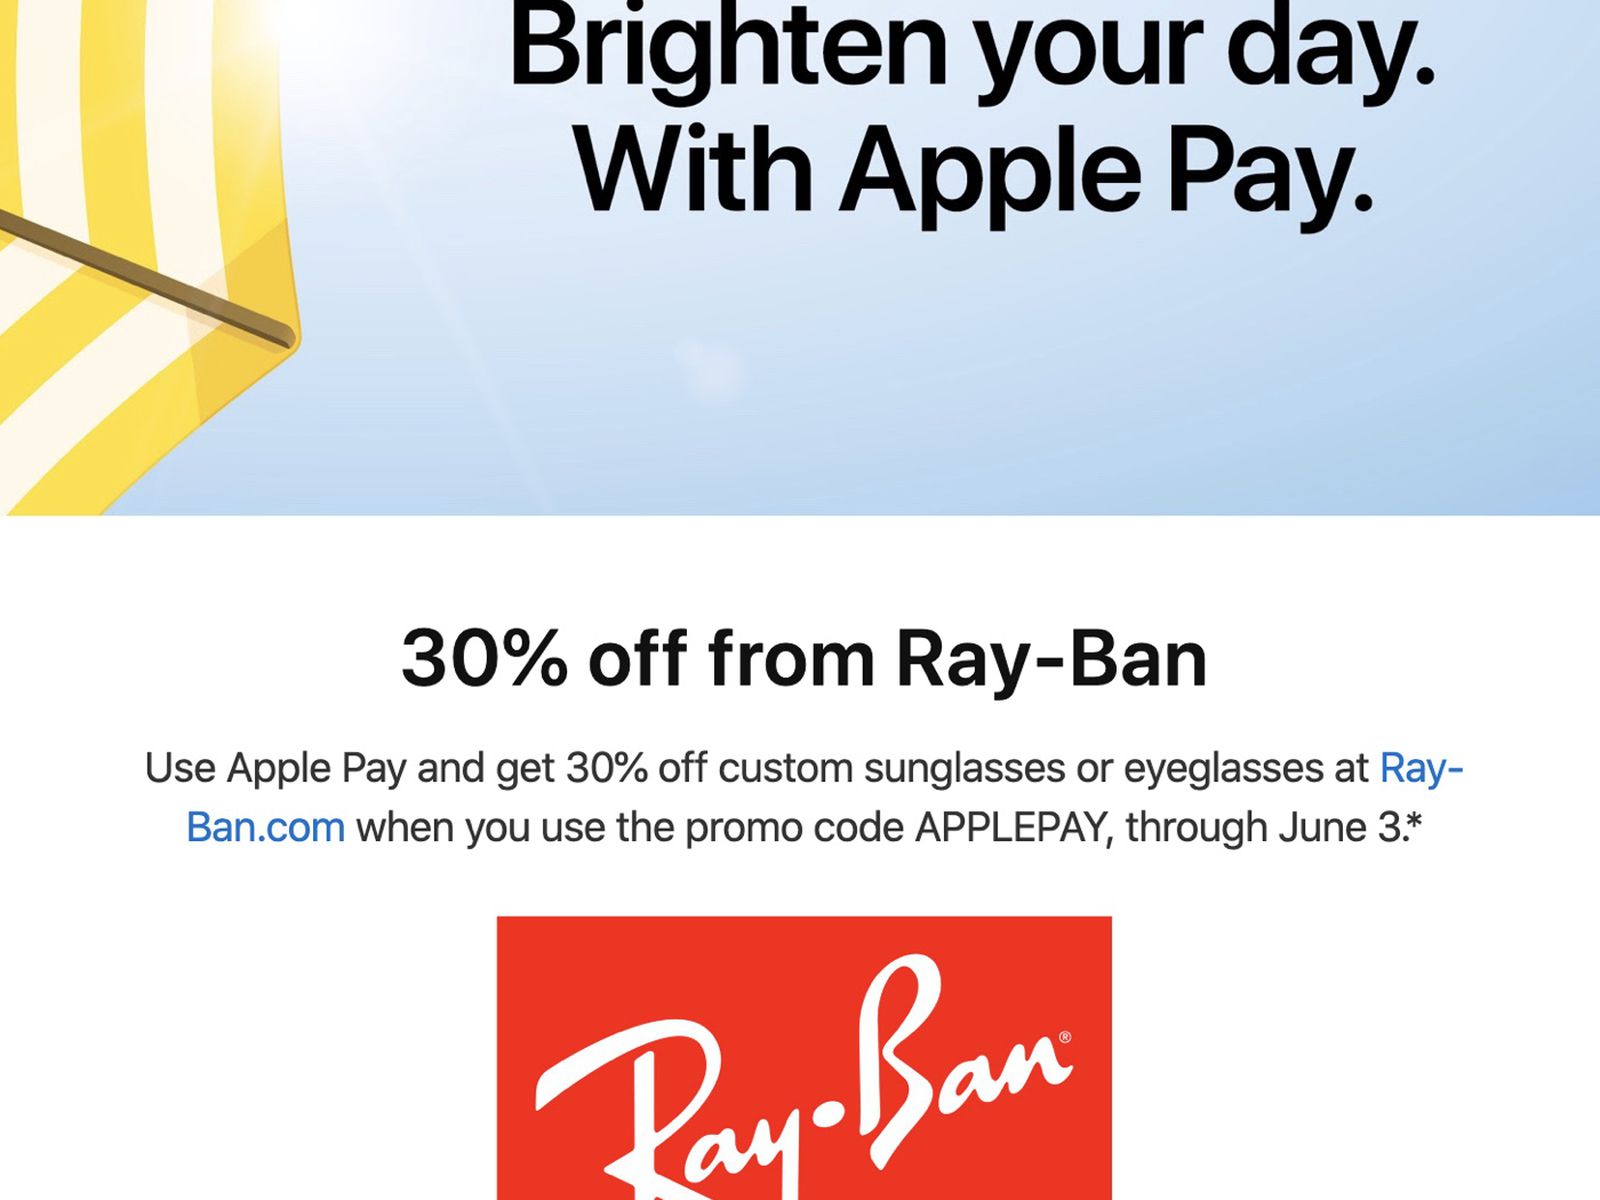 Apple Pay Promo Offers 30% Discount From Ray-Ban - MacRumors